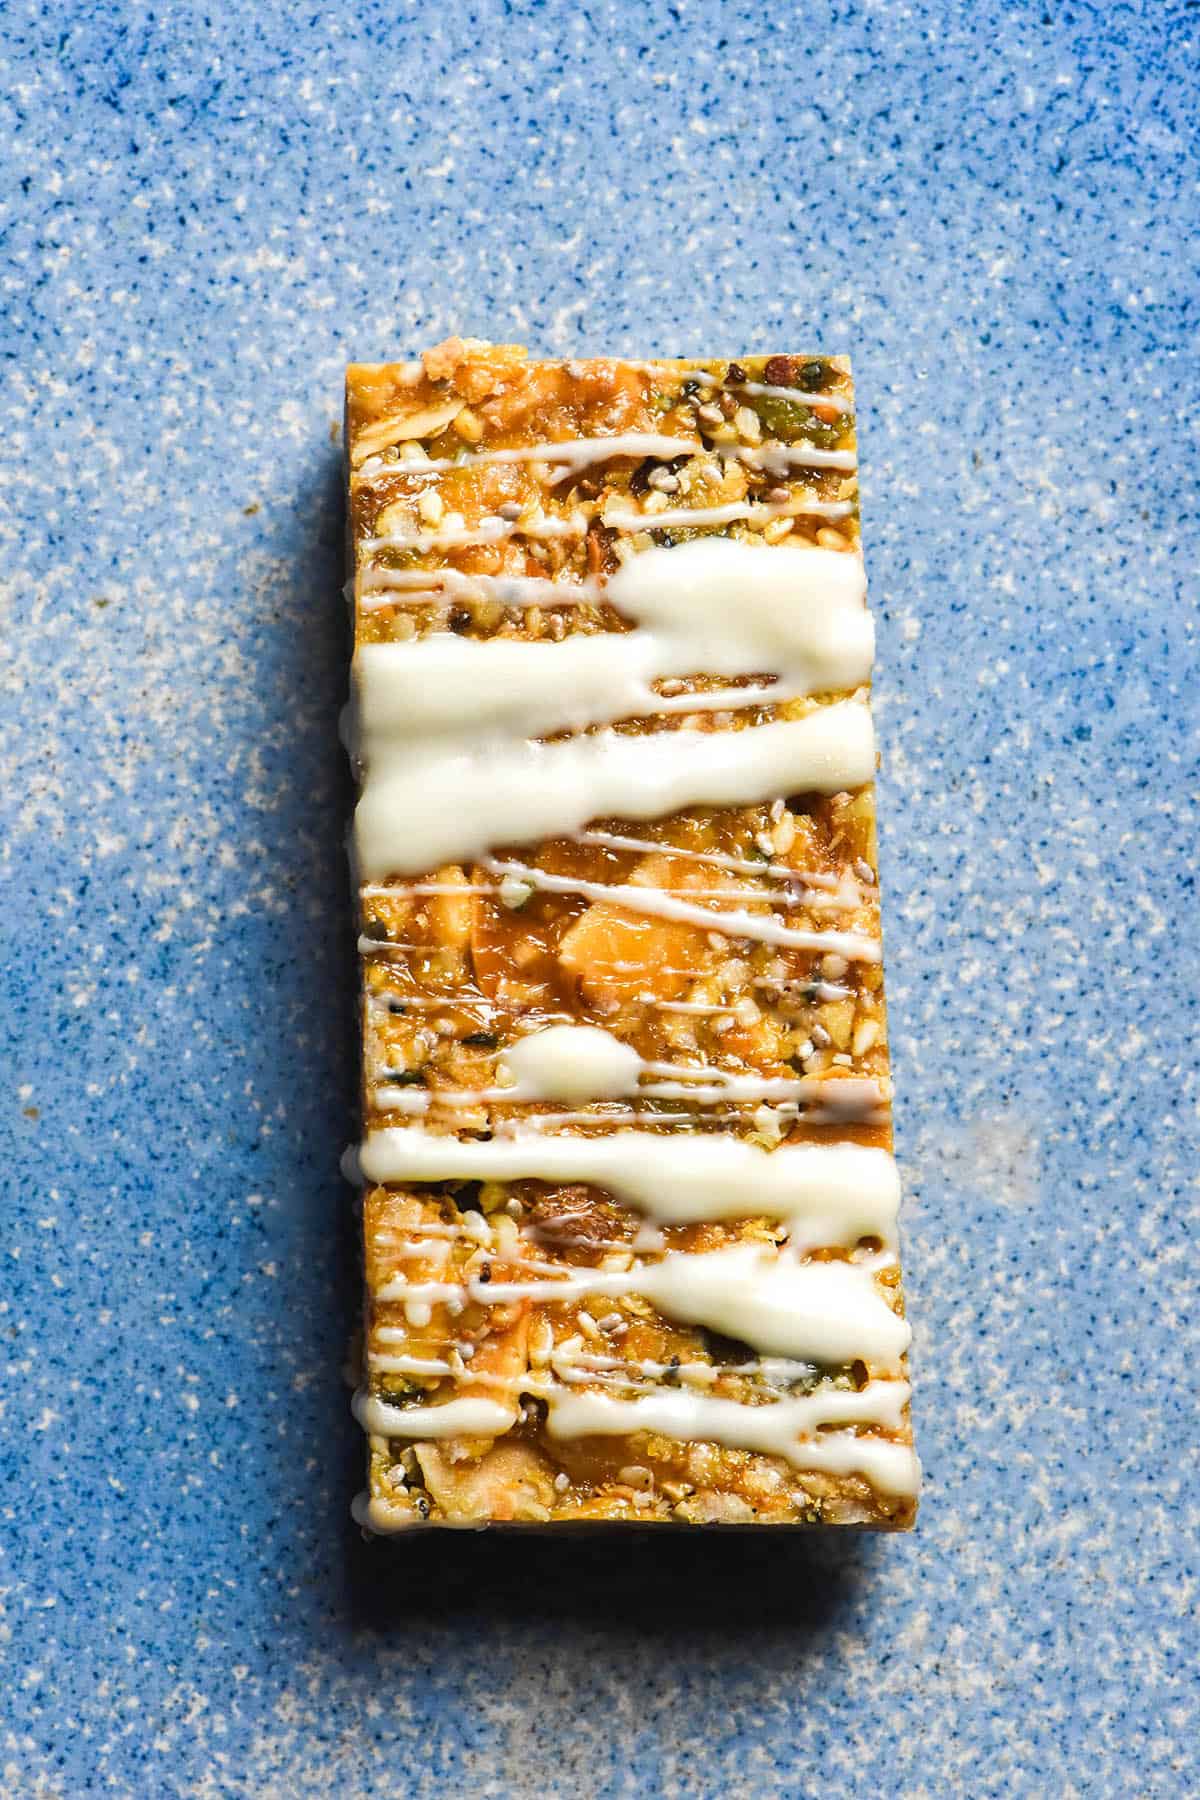 An aerial image of a gluten free granola bar drizzled with white chocolate atop a bright blue ceramic plate